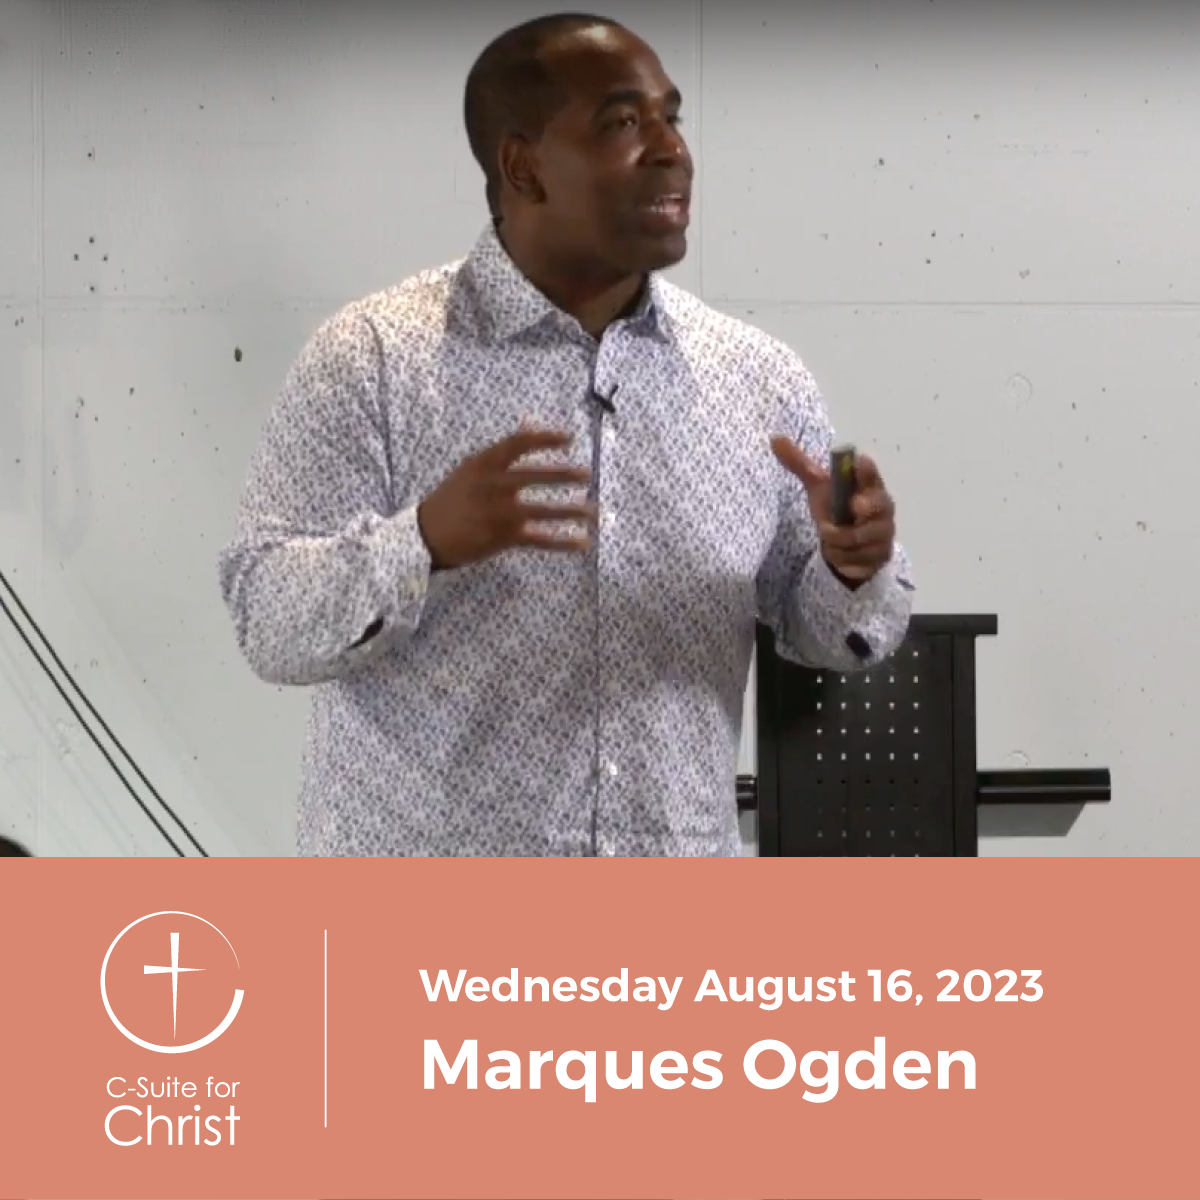 C-Suite for Christ | Wednesday August 16, 2023 Chapter meeting with Marques Ogden